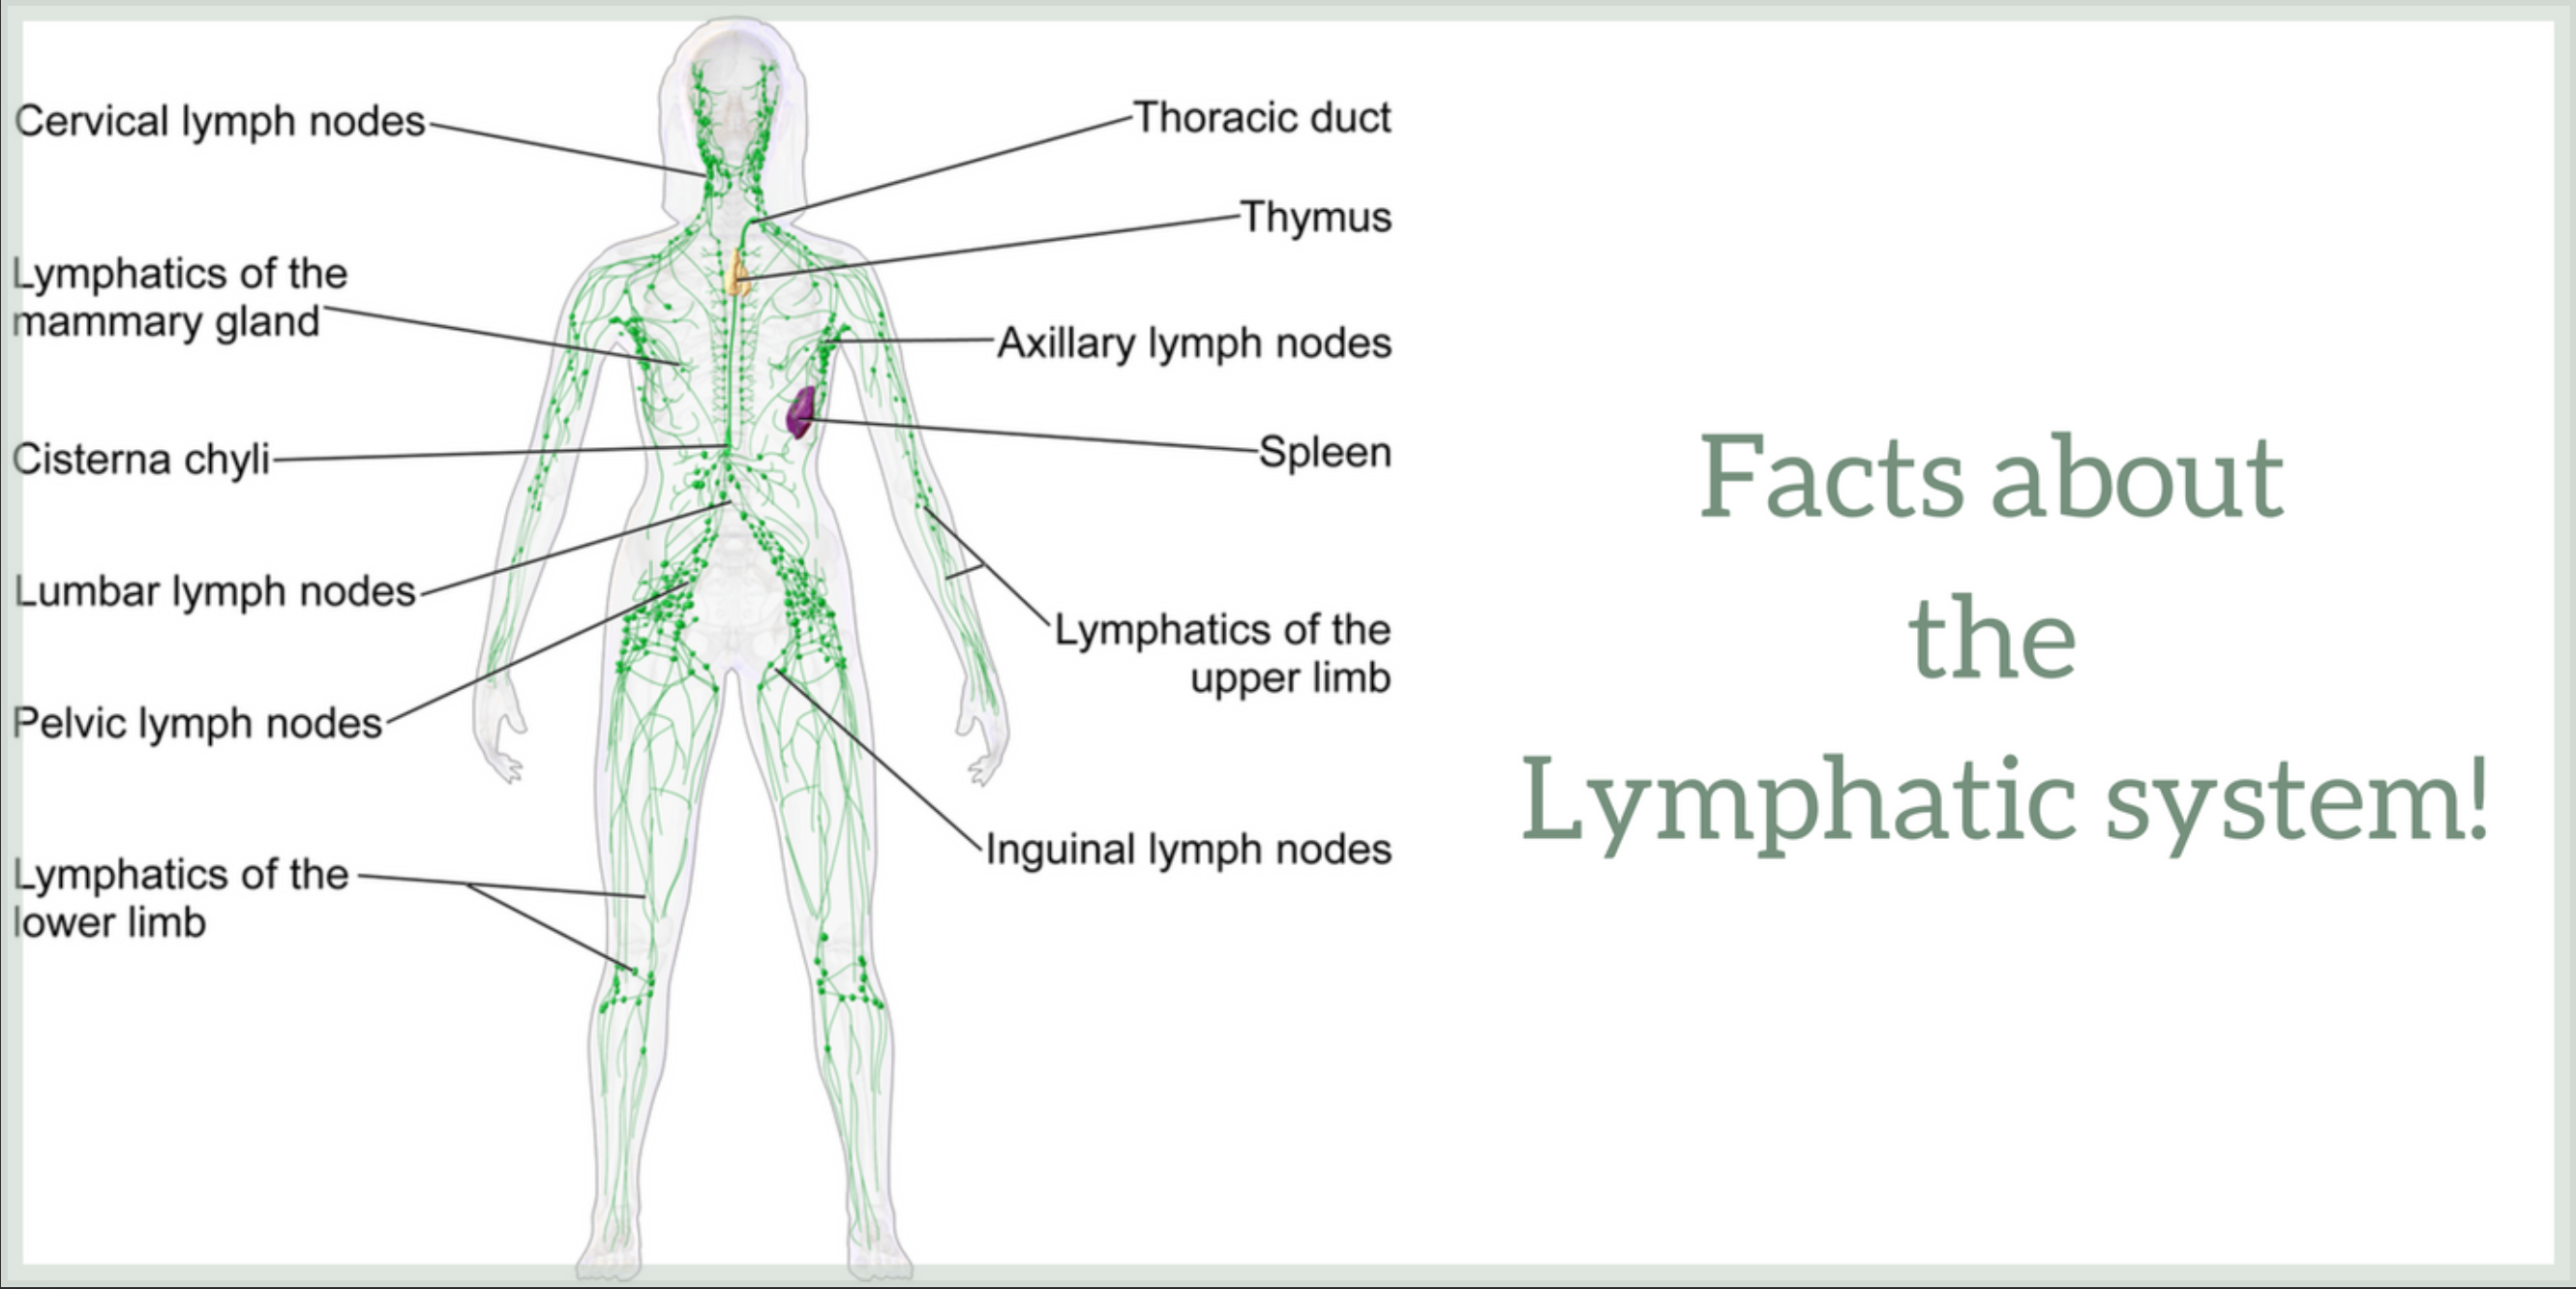 Facts about the Lymphatic system!